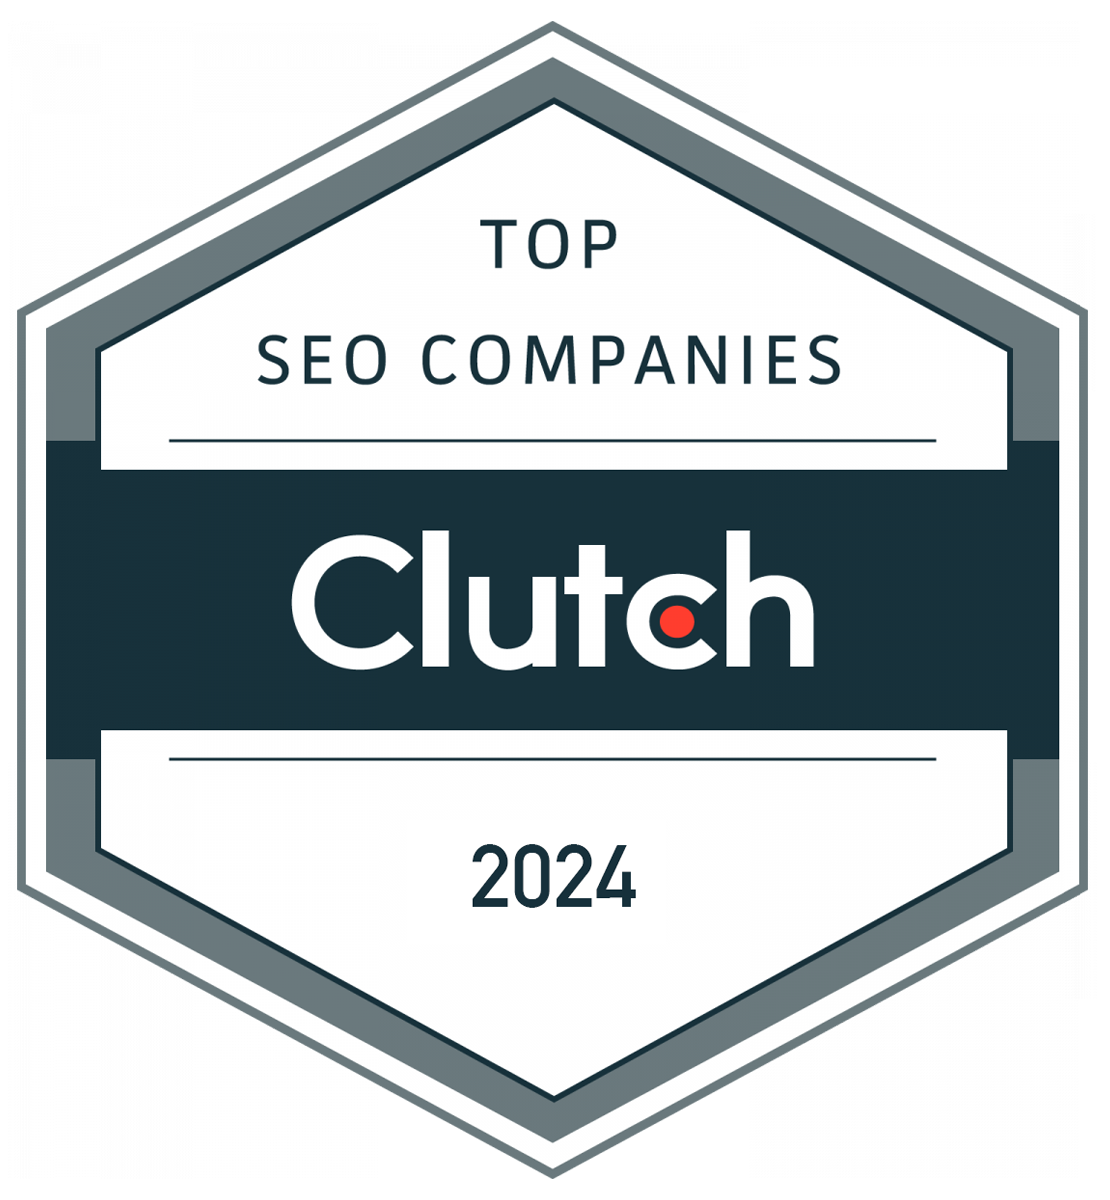 Top-SEO-Companies-2021-by-Clutch_new